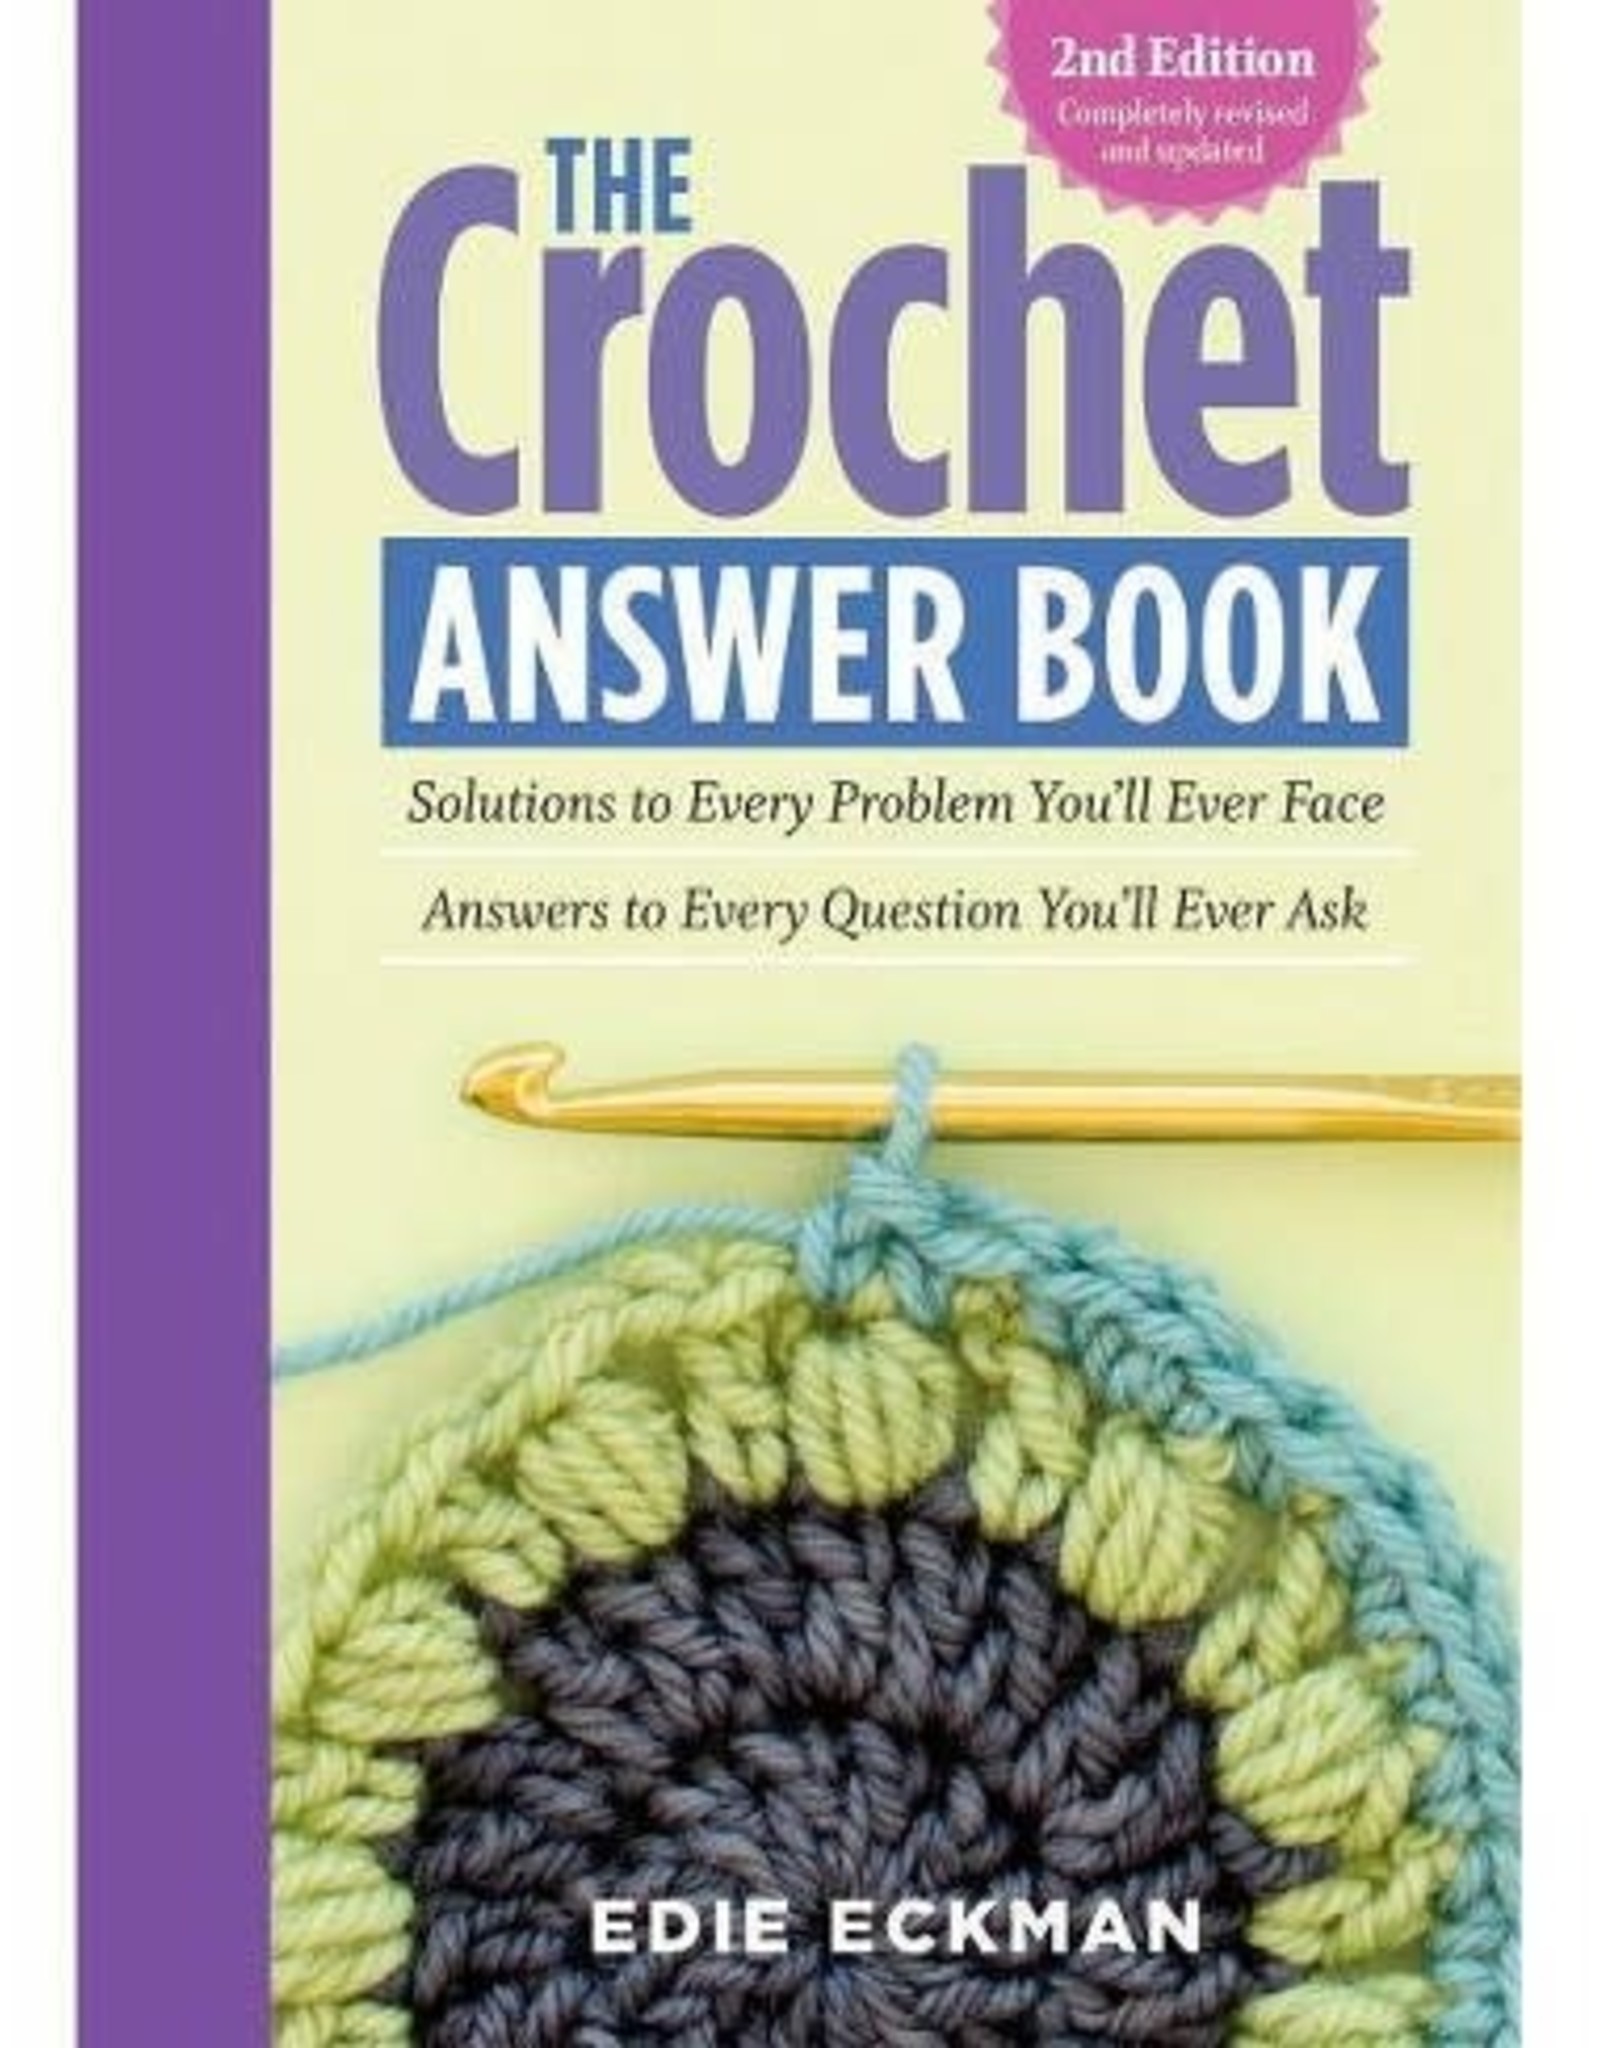 The Crochet Answer Book by Edie Eckman